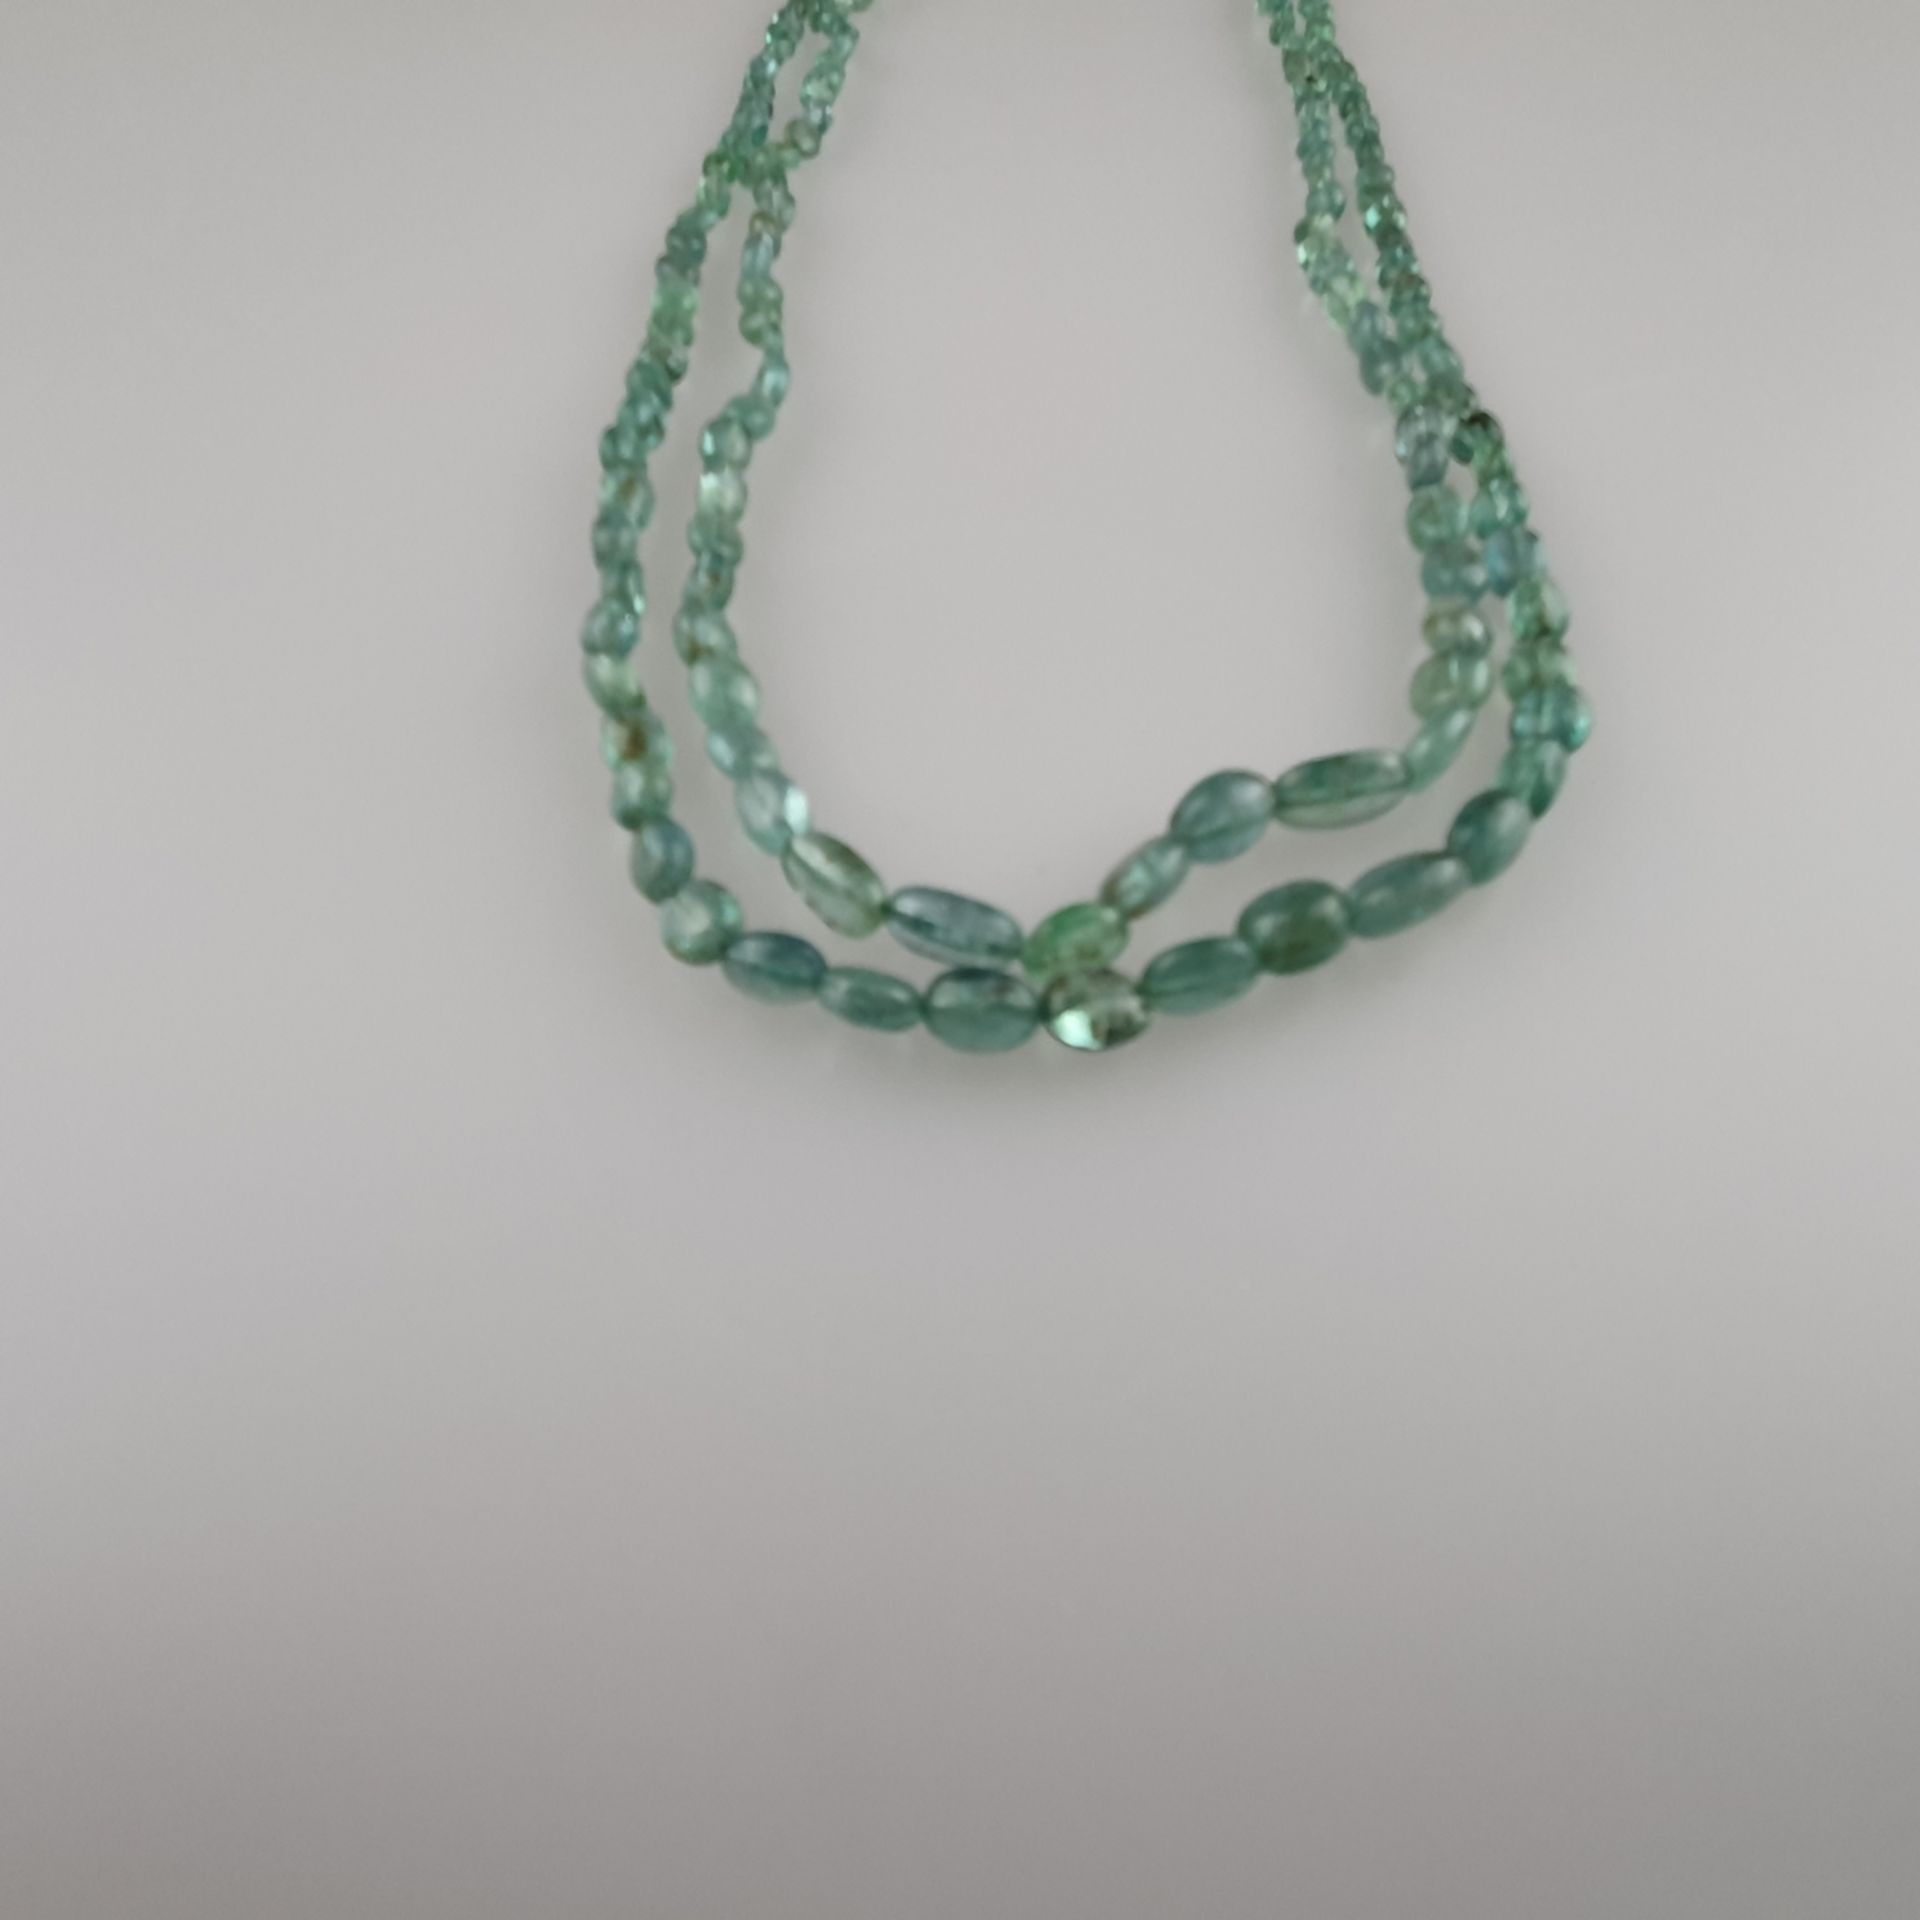 Smaragd-Collier - zweireihige Halskette mit Smaragd-Cab | 125 cts Cabochon Emerald 2 Strand Necklac - Image 2 of 4